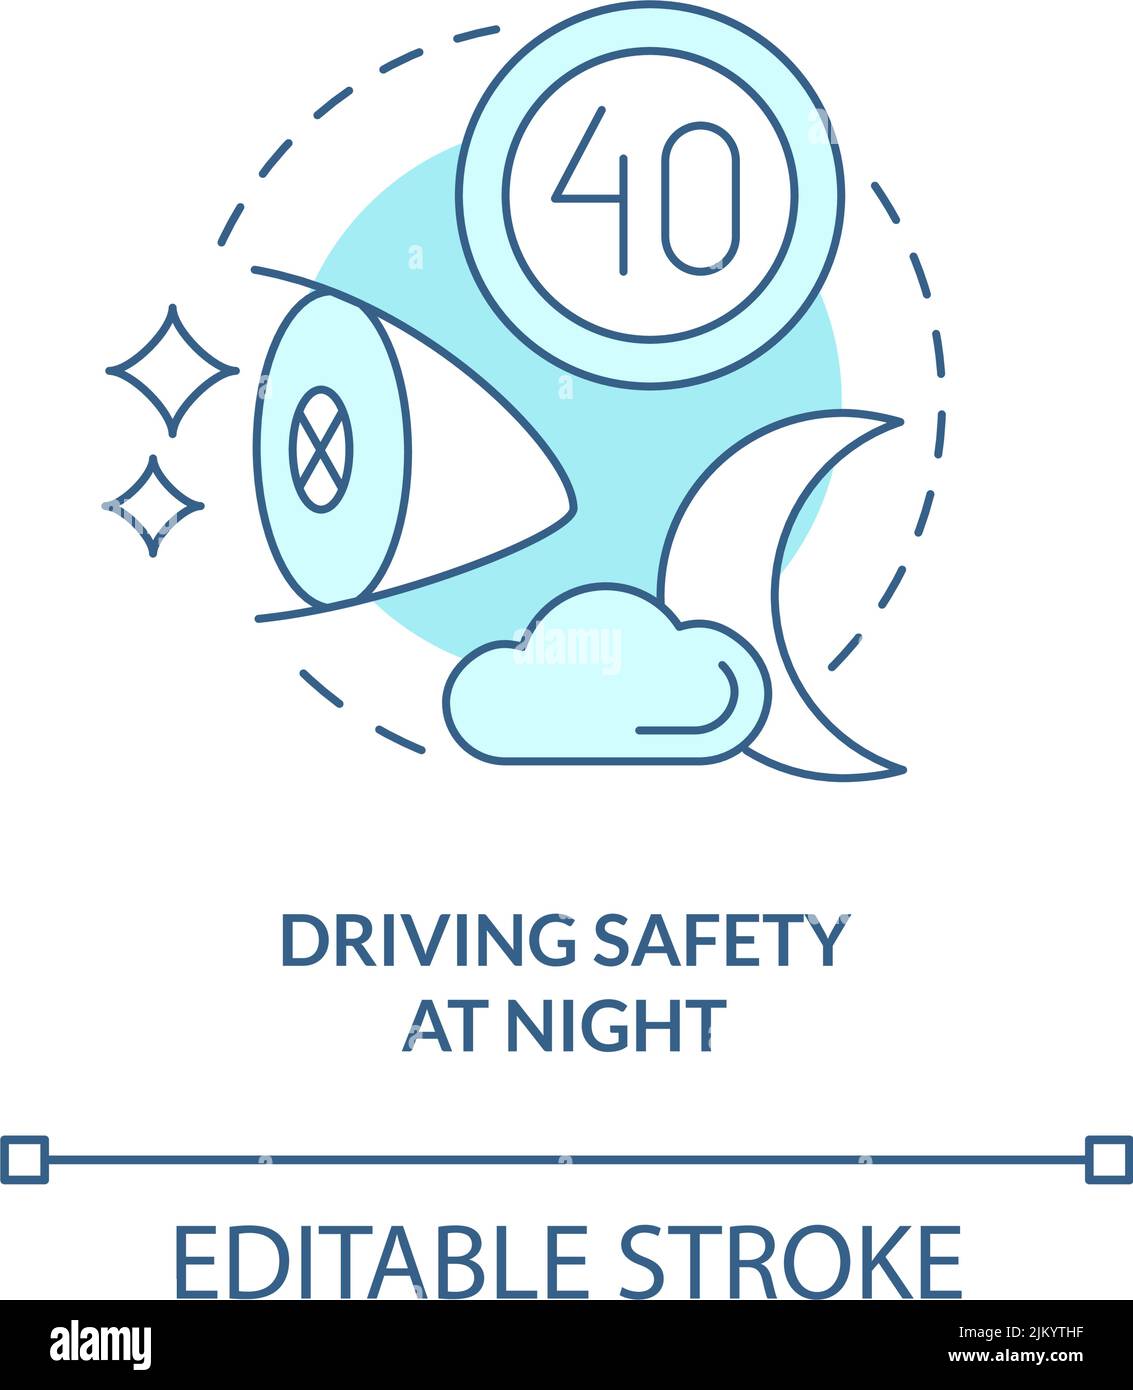 Driving safety at night turquoise concept icon Stock Vector